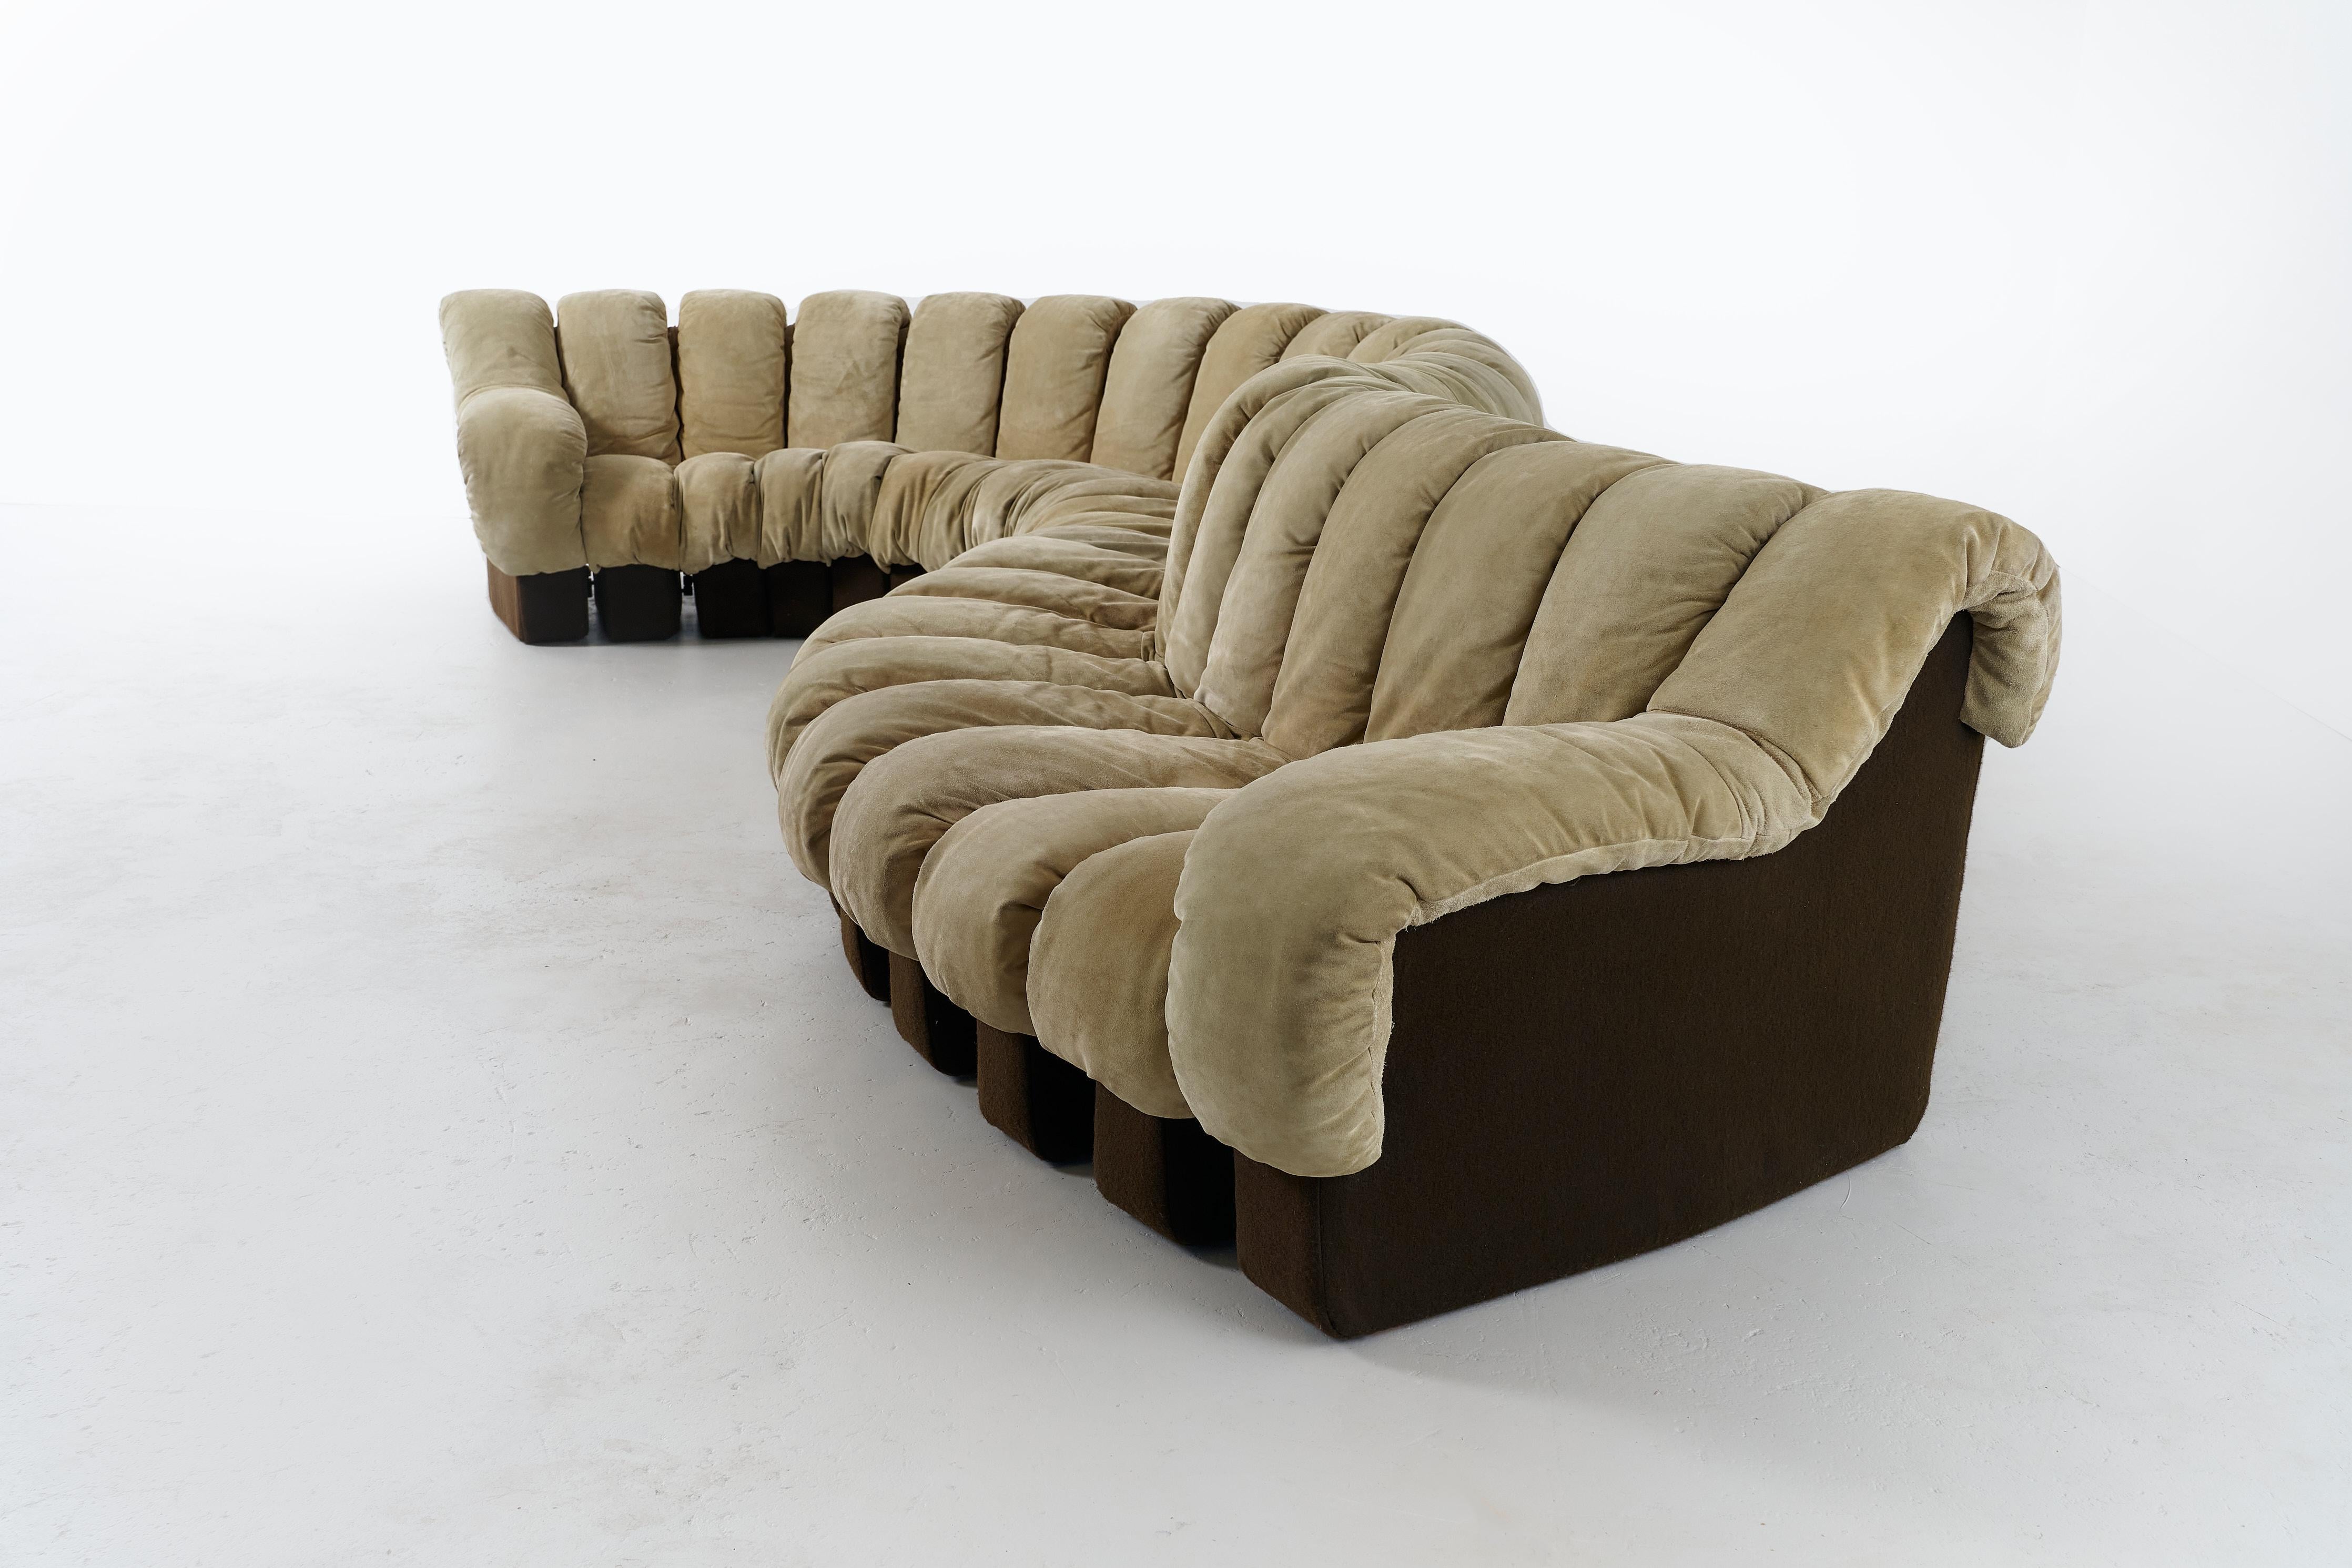 DS600 Modular Non Stop Sofa by Ueli Berger for De Sede. Set of 22 Pieces In Good Condition For Sale In Melbourne, VIC